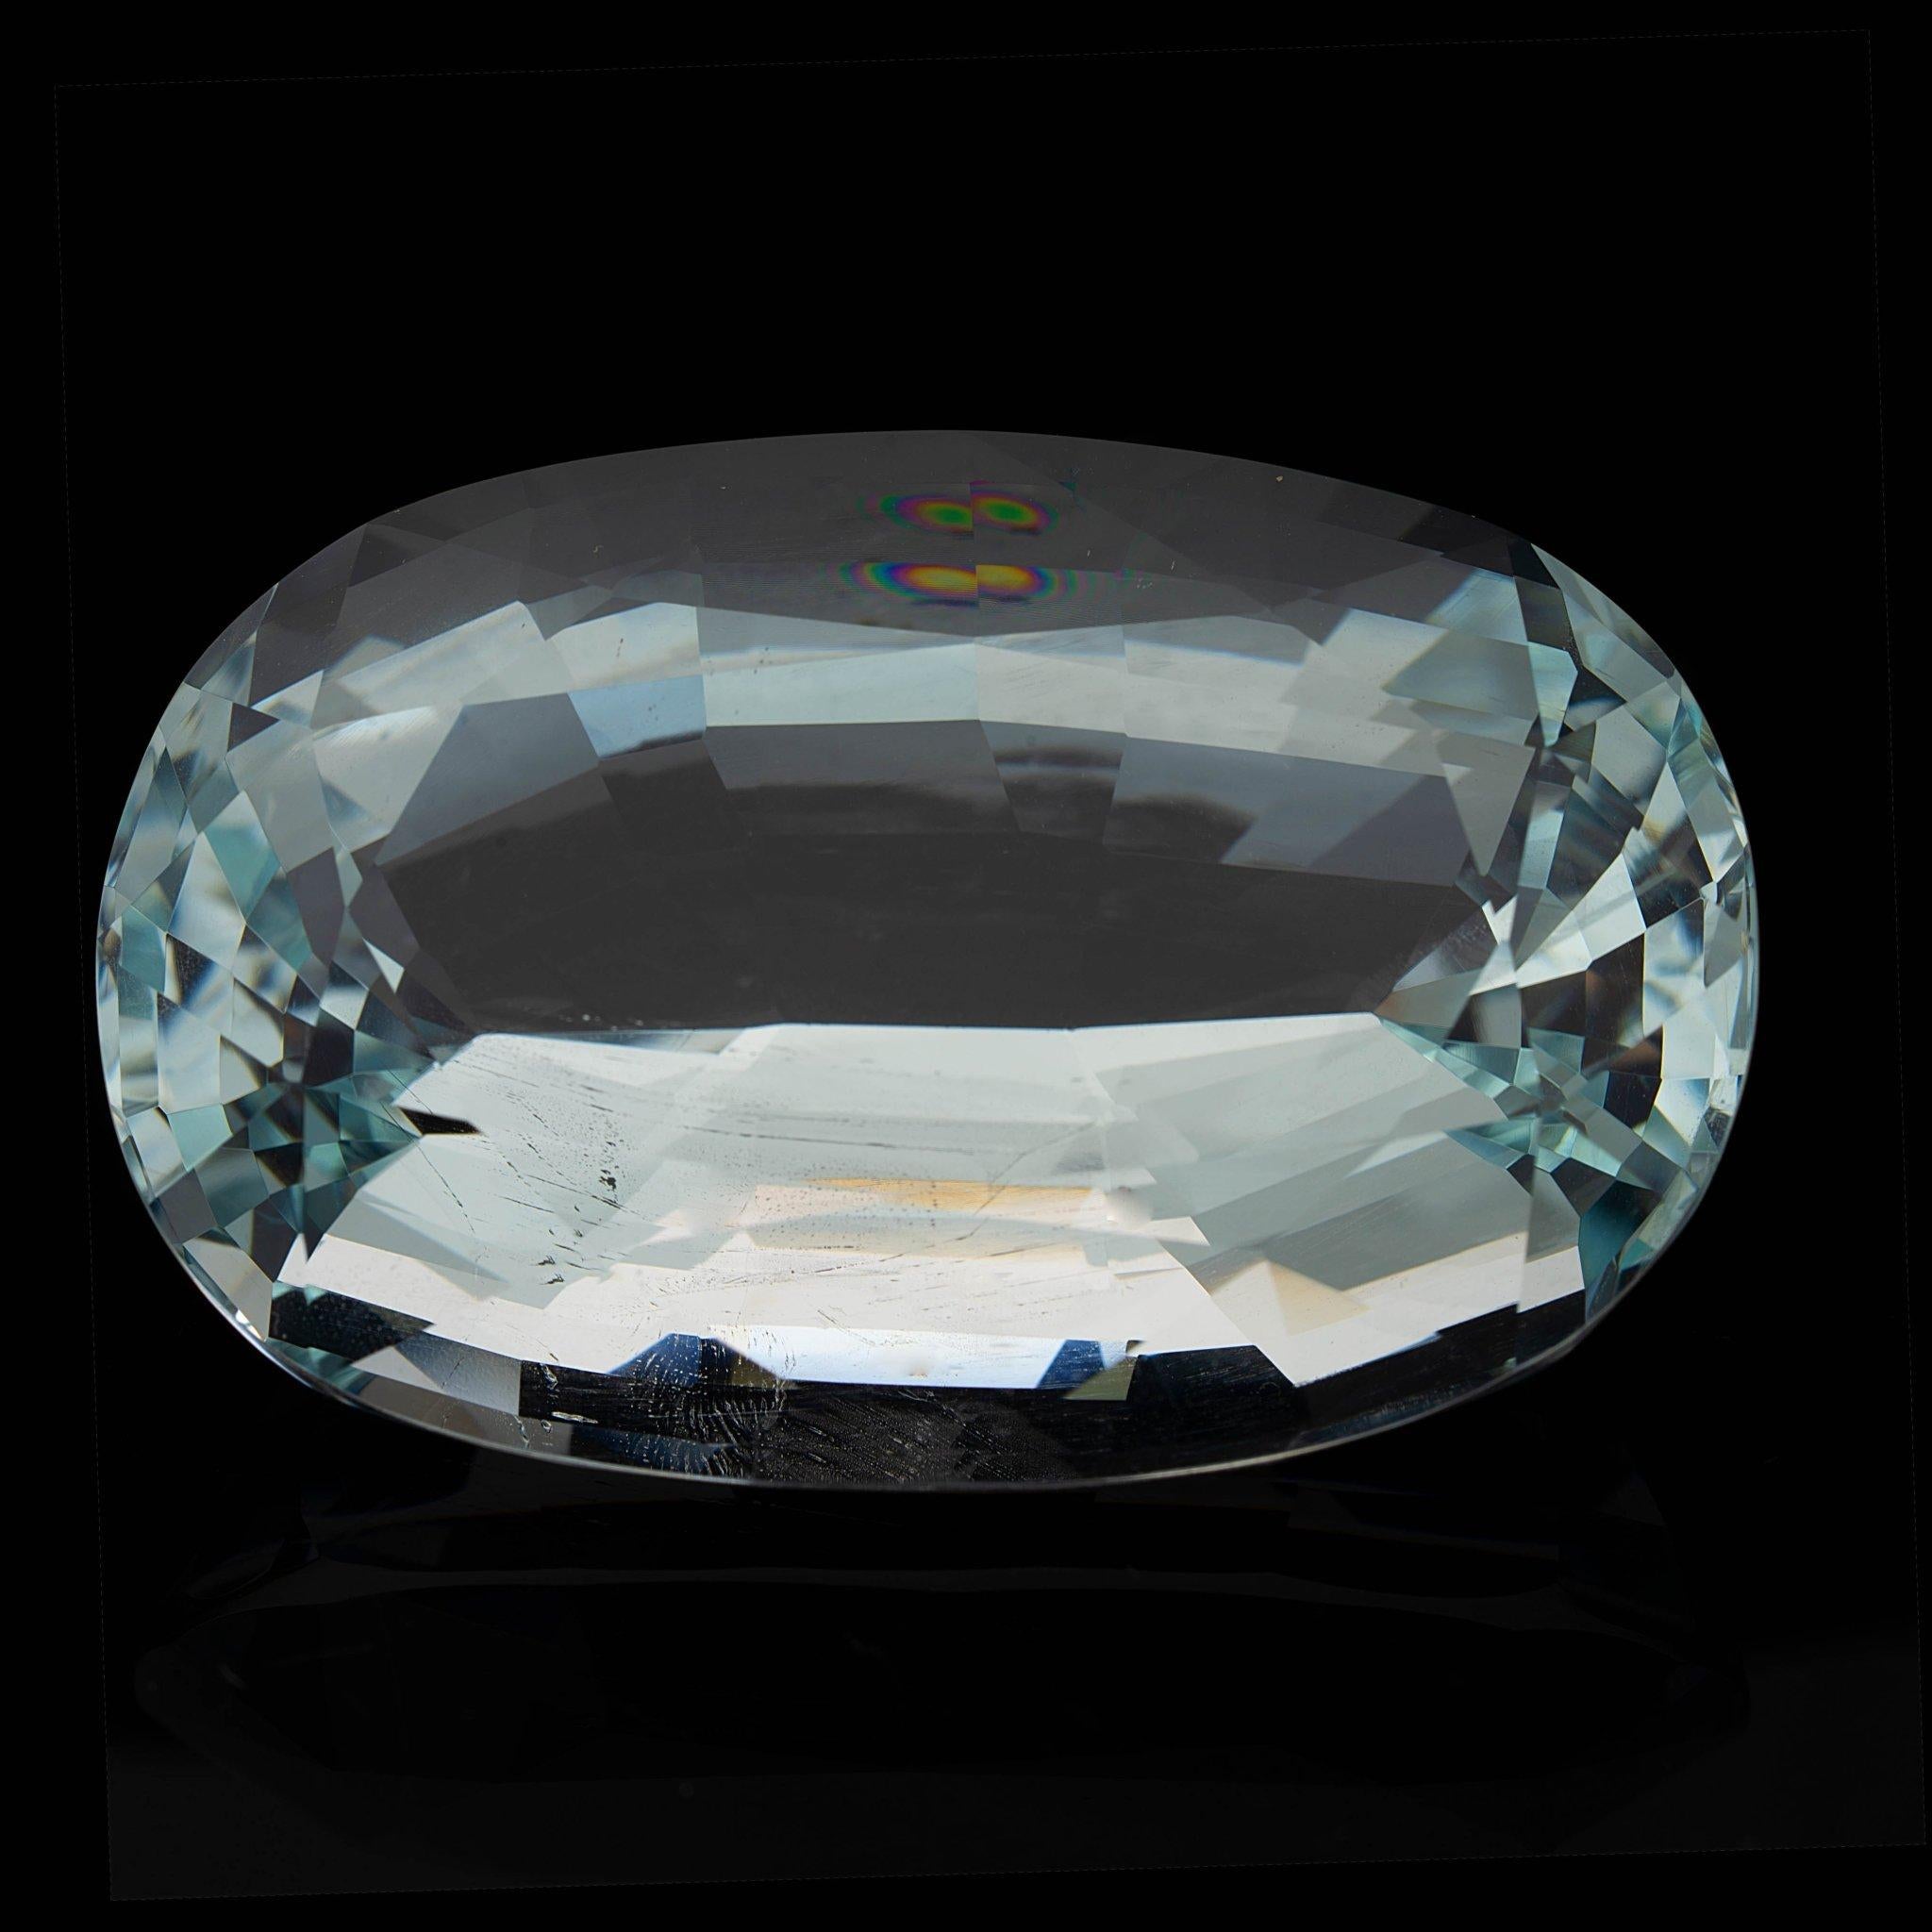 Women's or Men's 113.03 Carat Oval Cut Aquamarine From Brazil For Sale